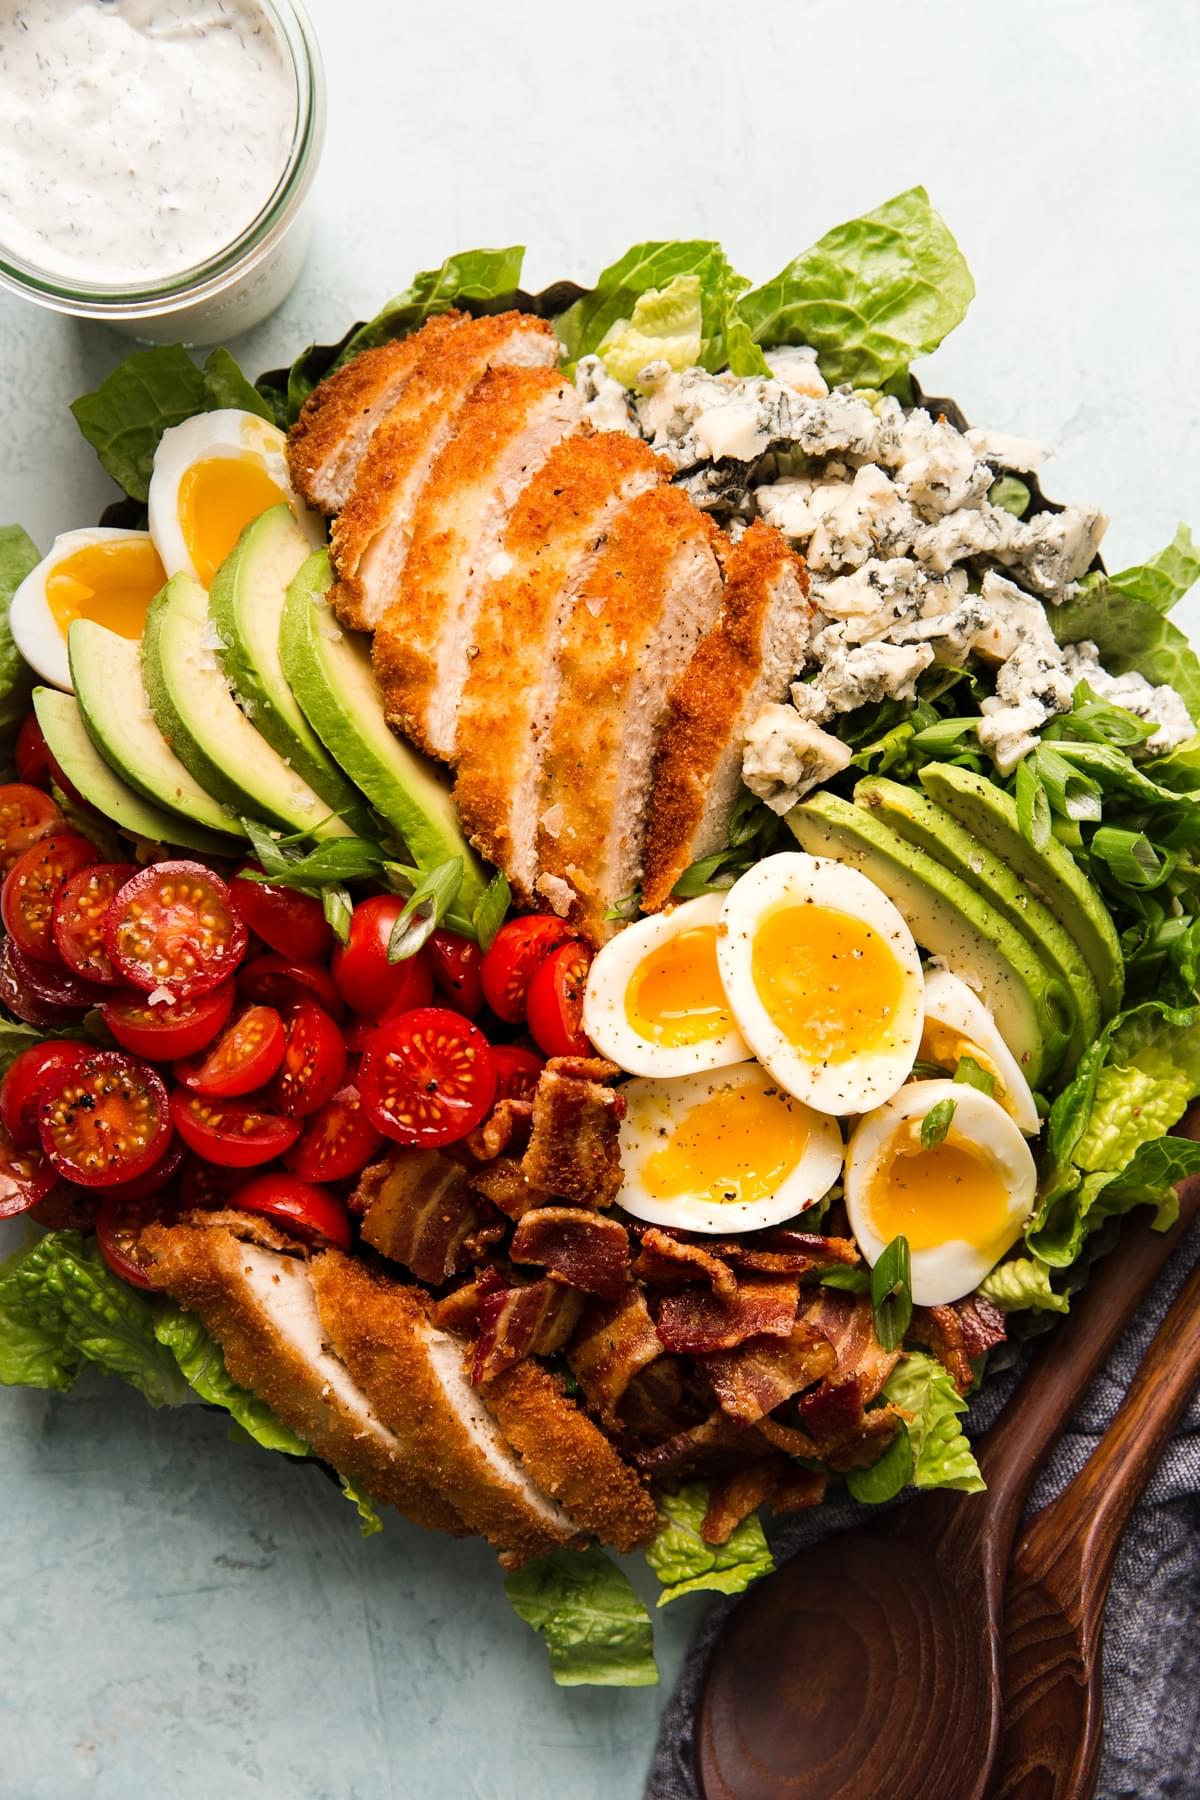 Classic cobb salad with crispy panko chicken and buttermilk ranch dressing